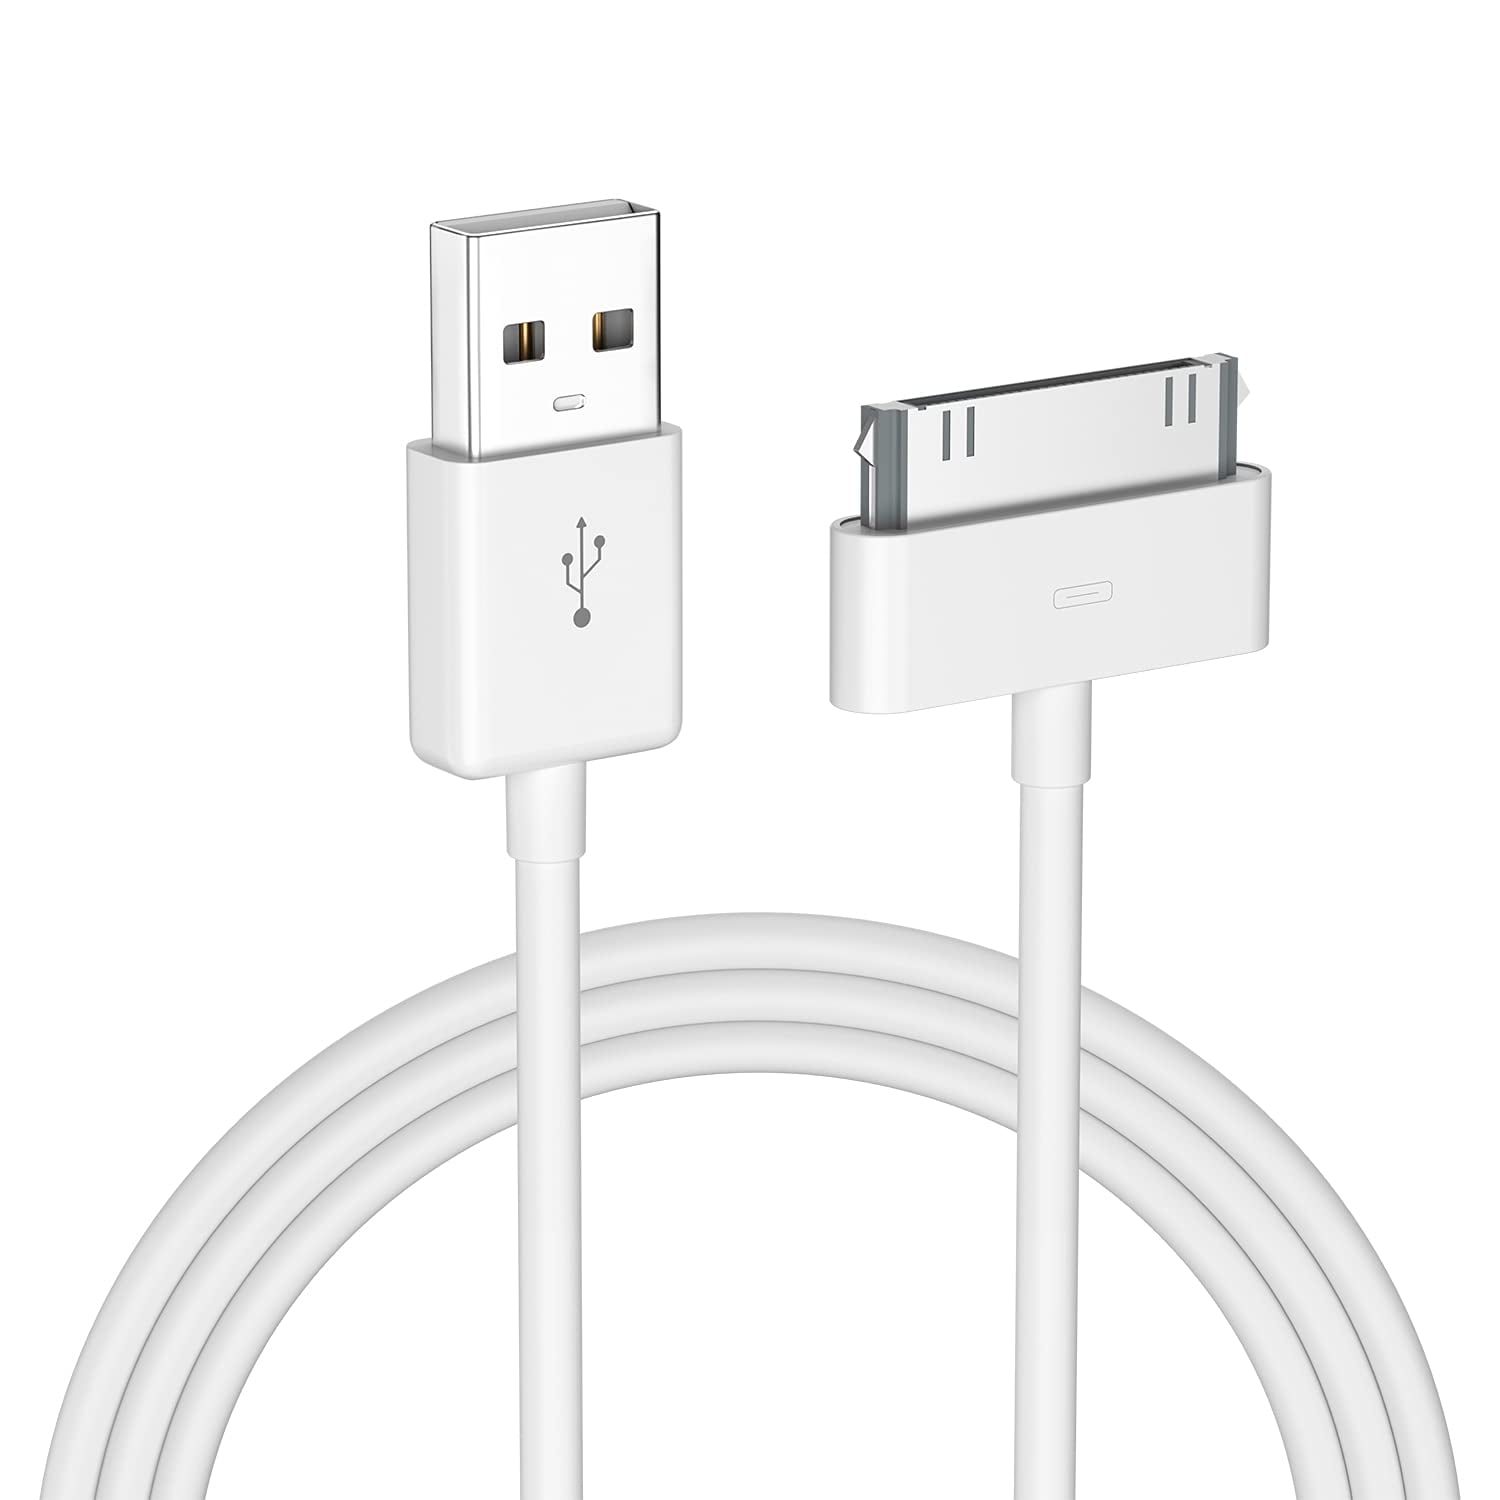 Apple Certified 30 Pin USB Charging Cable, 4.0ft USB Sync Charging Cord  iPhone Compatible for 4 4s 3G 3GS iPad 1 2 3 iPod Touch Nano White (1 PCS)  